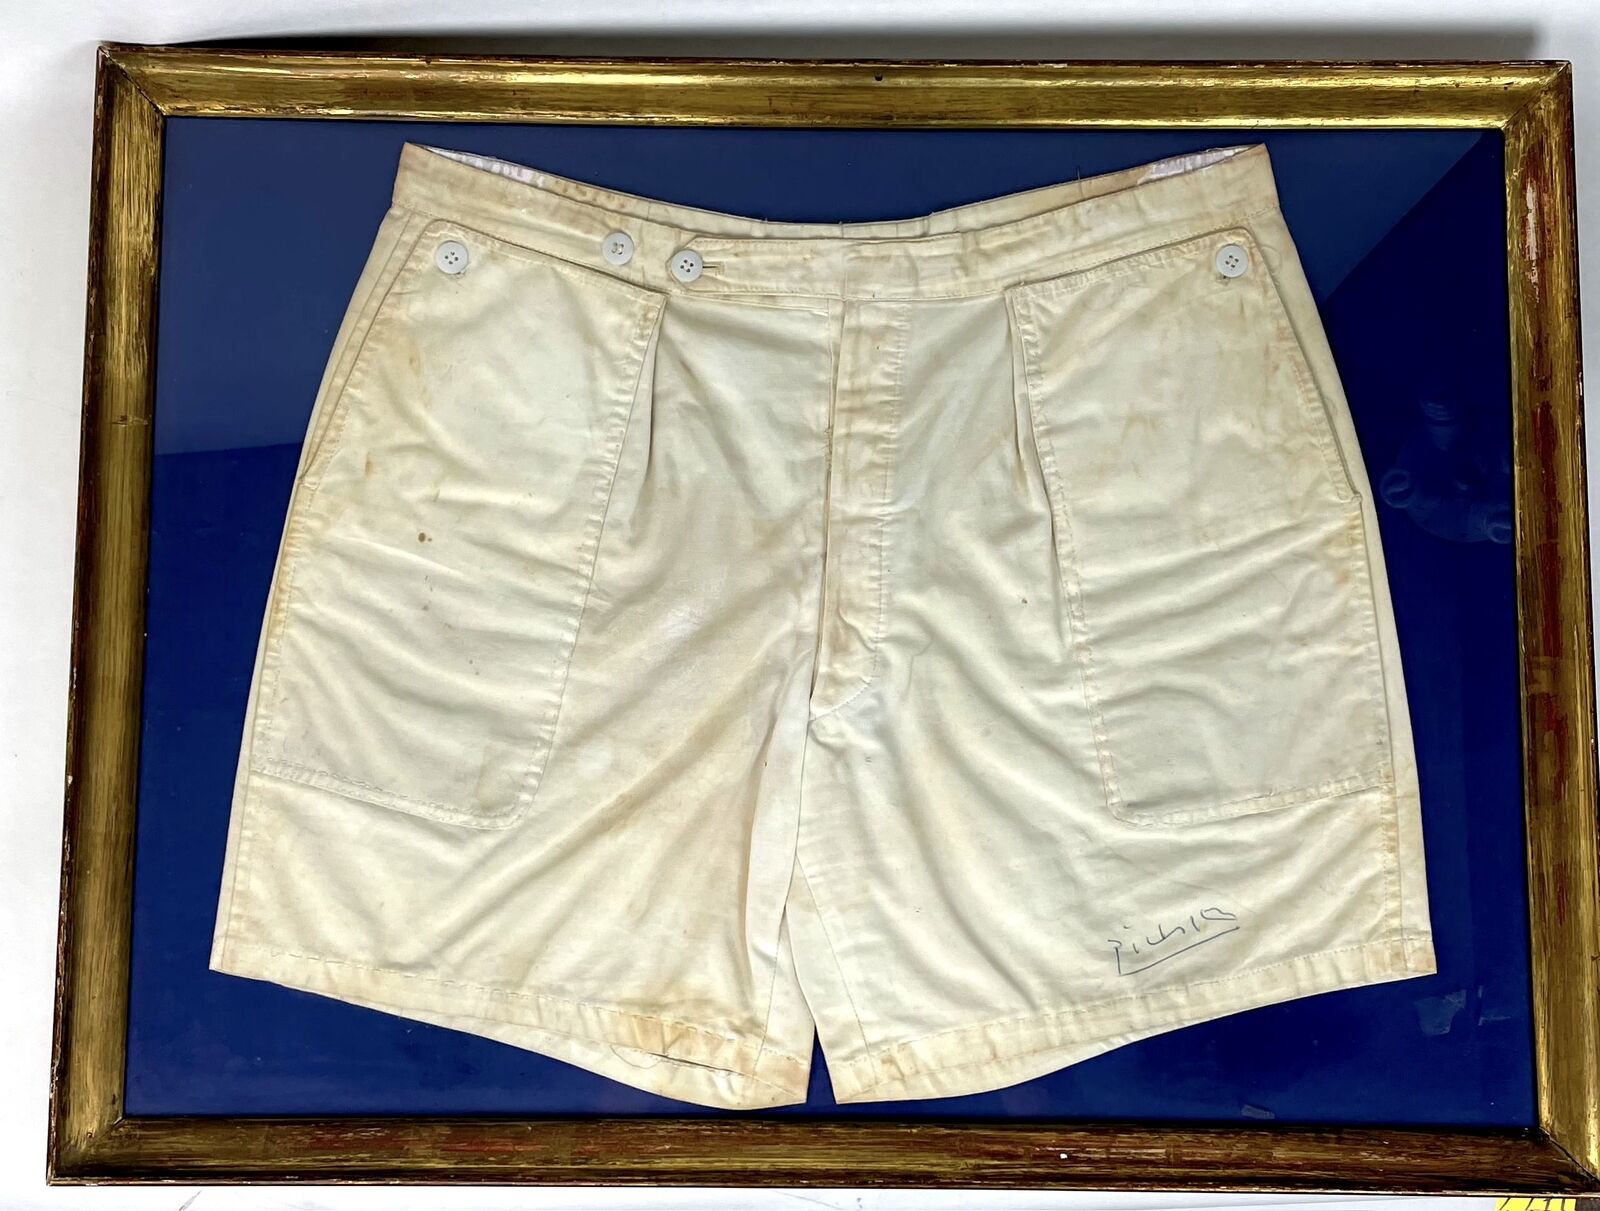 Picasso, Pablo. (1881–1973): Signed Pair of Shorts